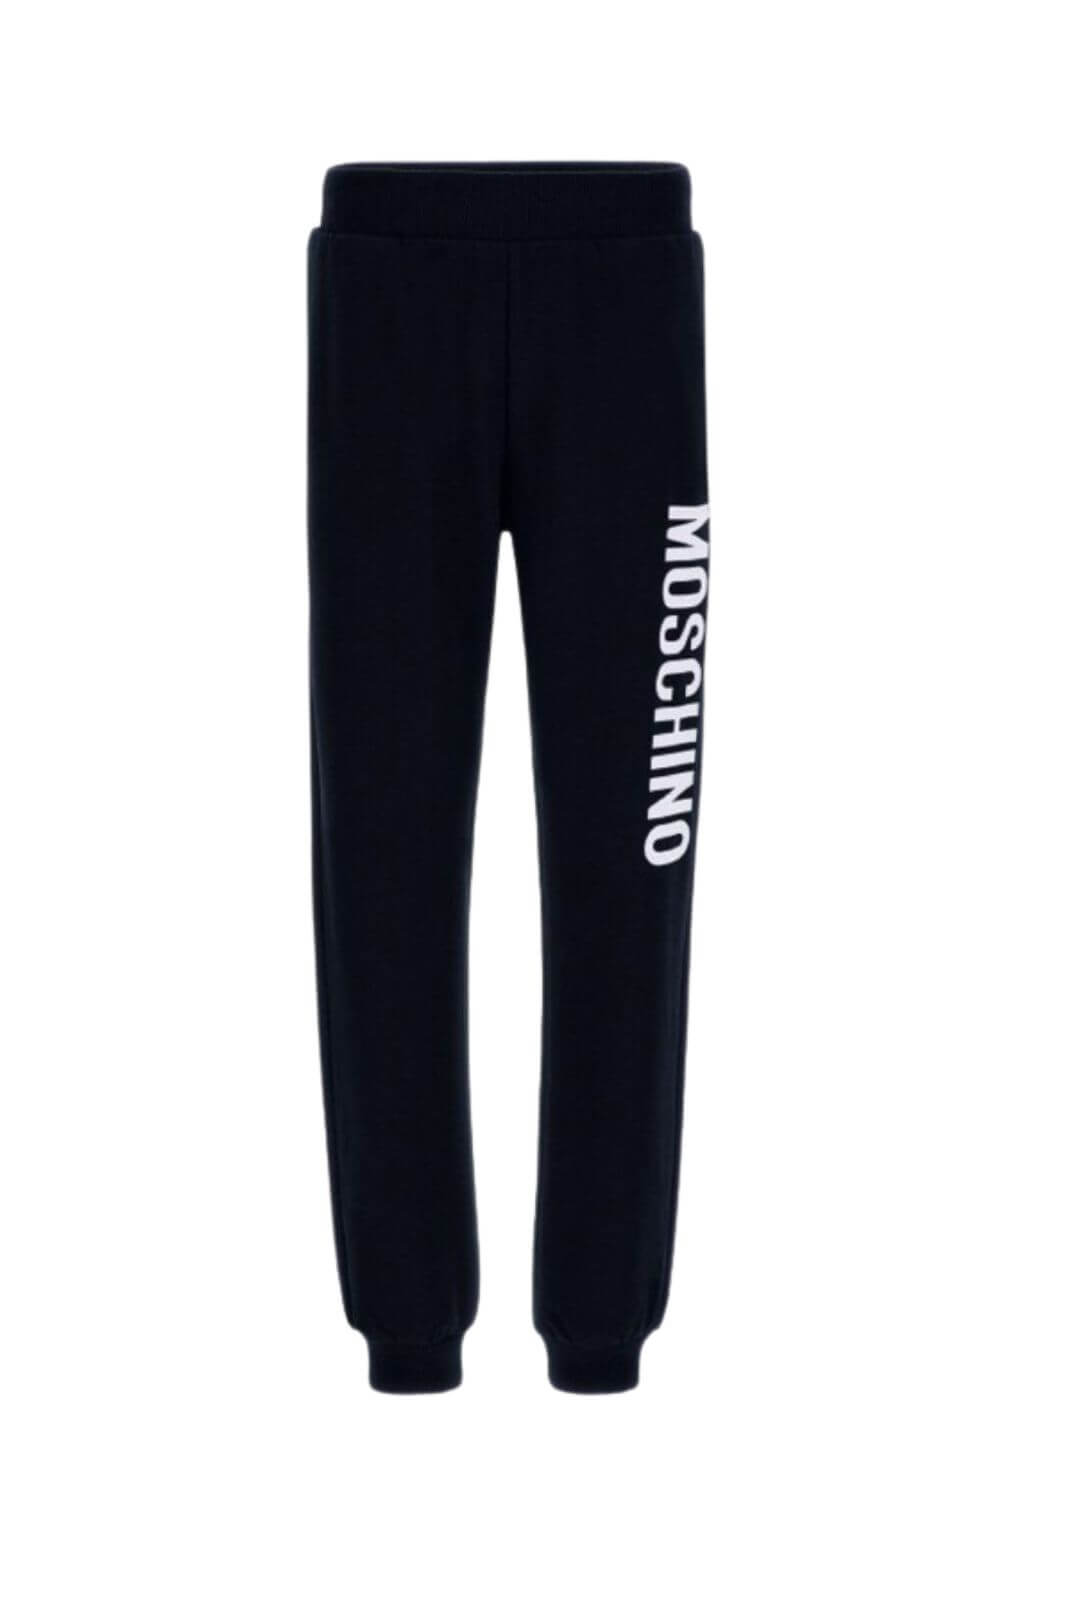 Moschino Girl's jogging trousers